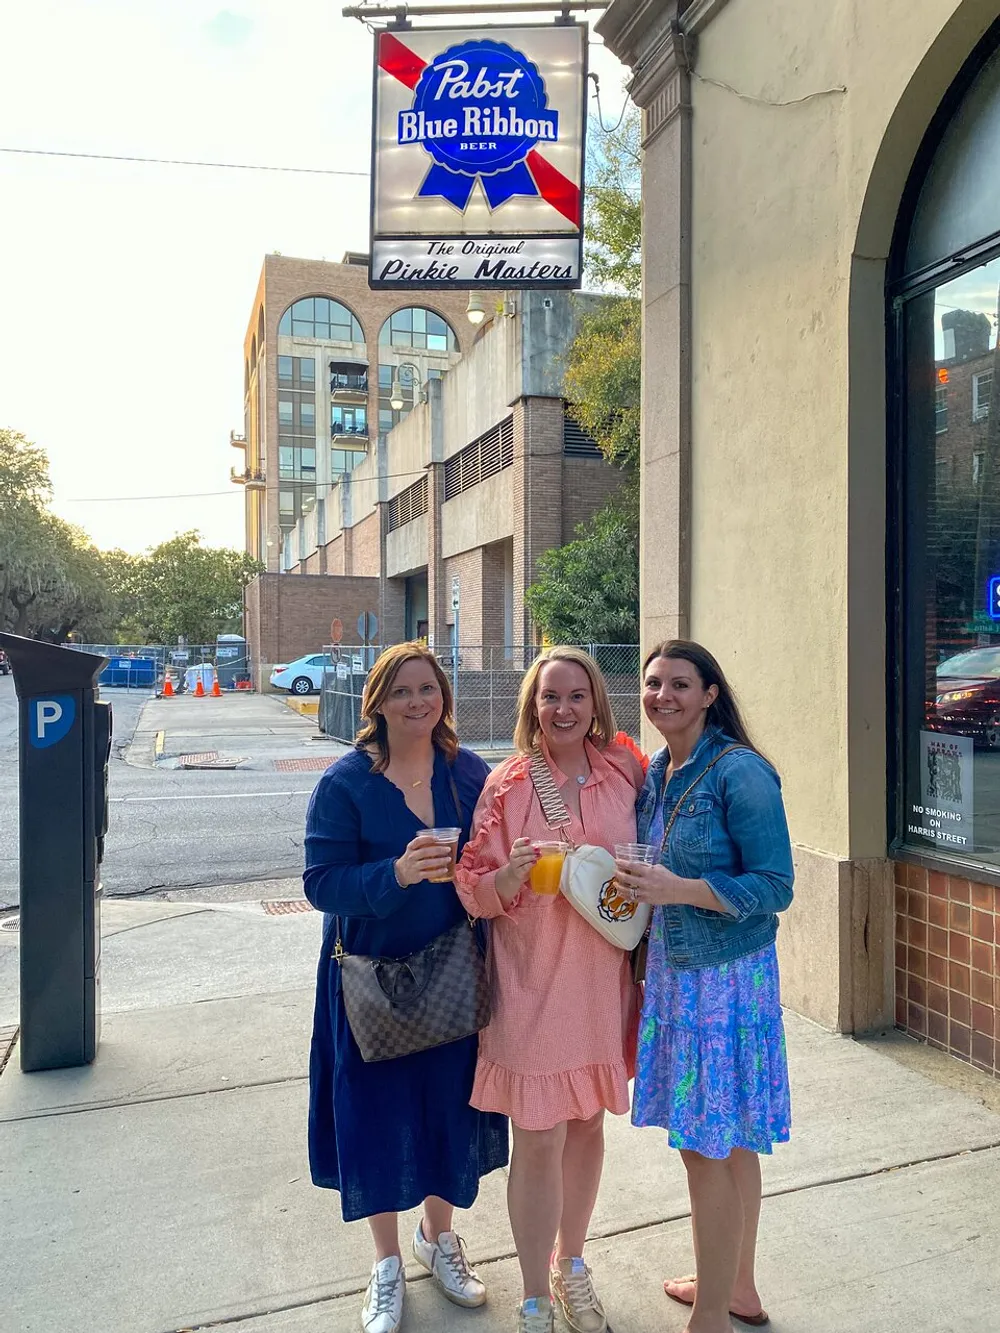 Three women are smiling for the camera while holding drinks on a sunny street corner under a Pabst Blue Ribbon beer sign